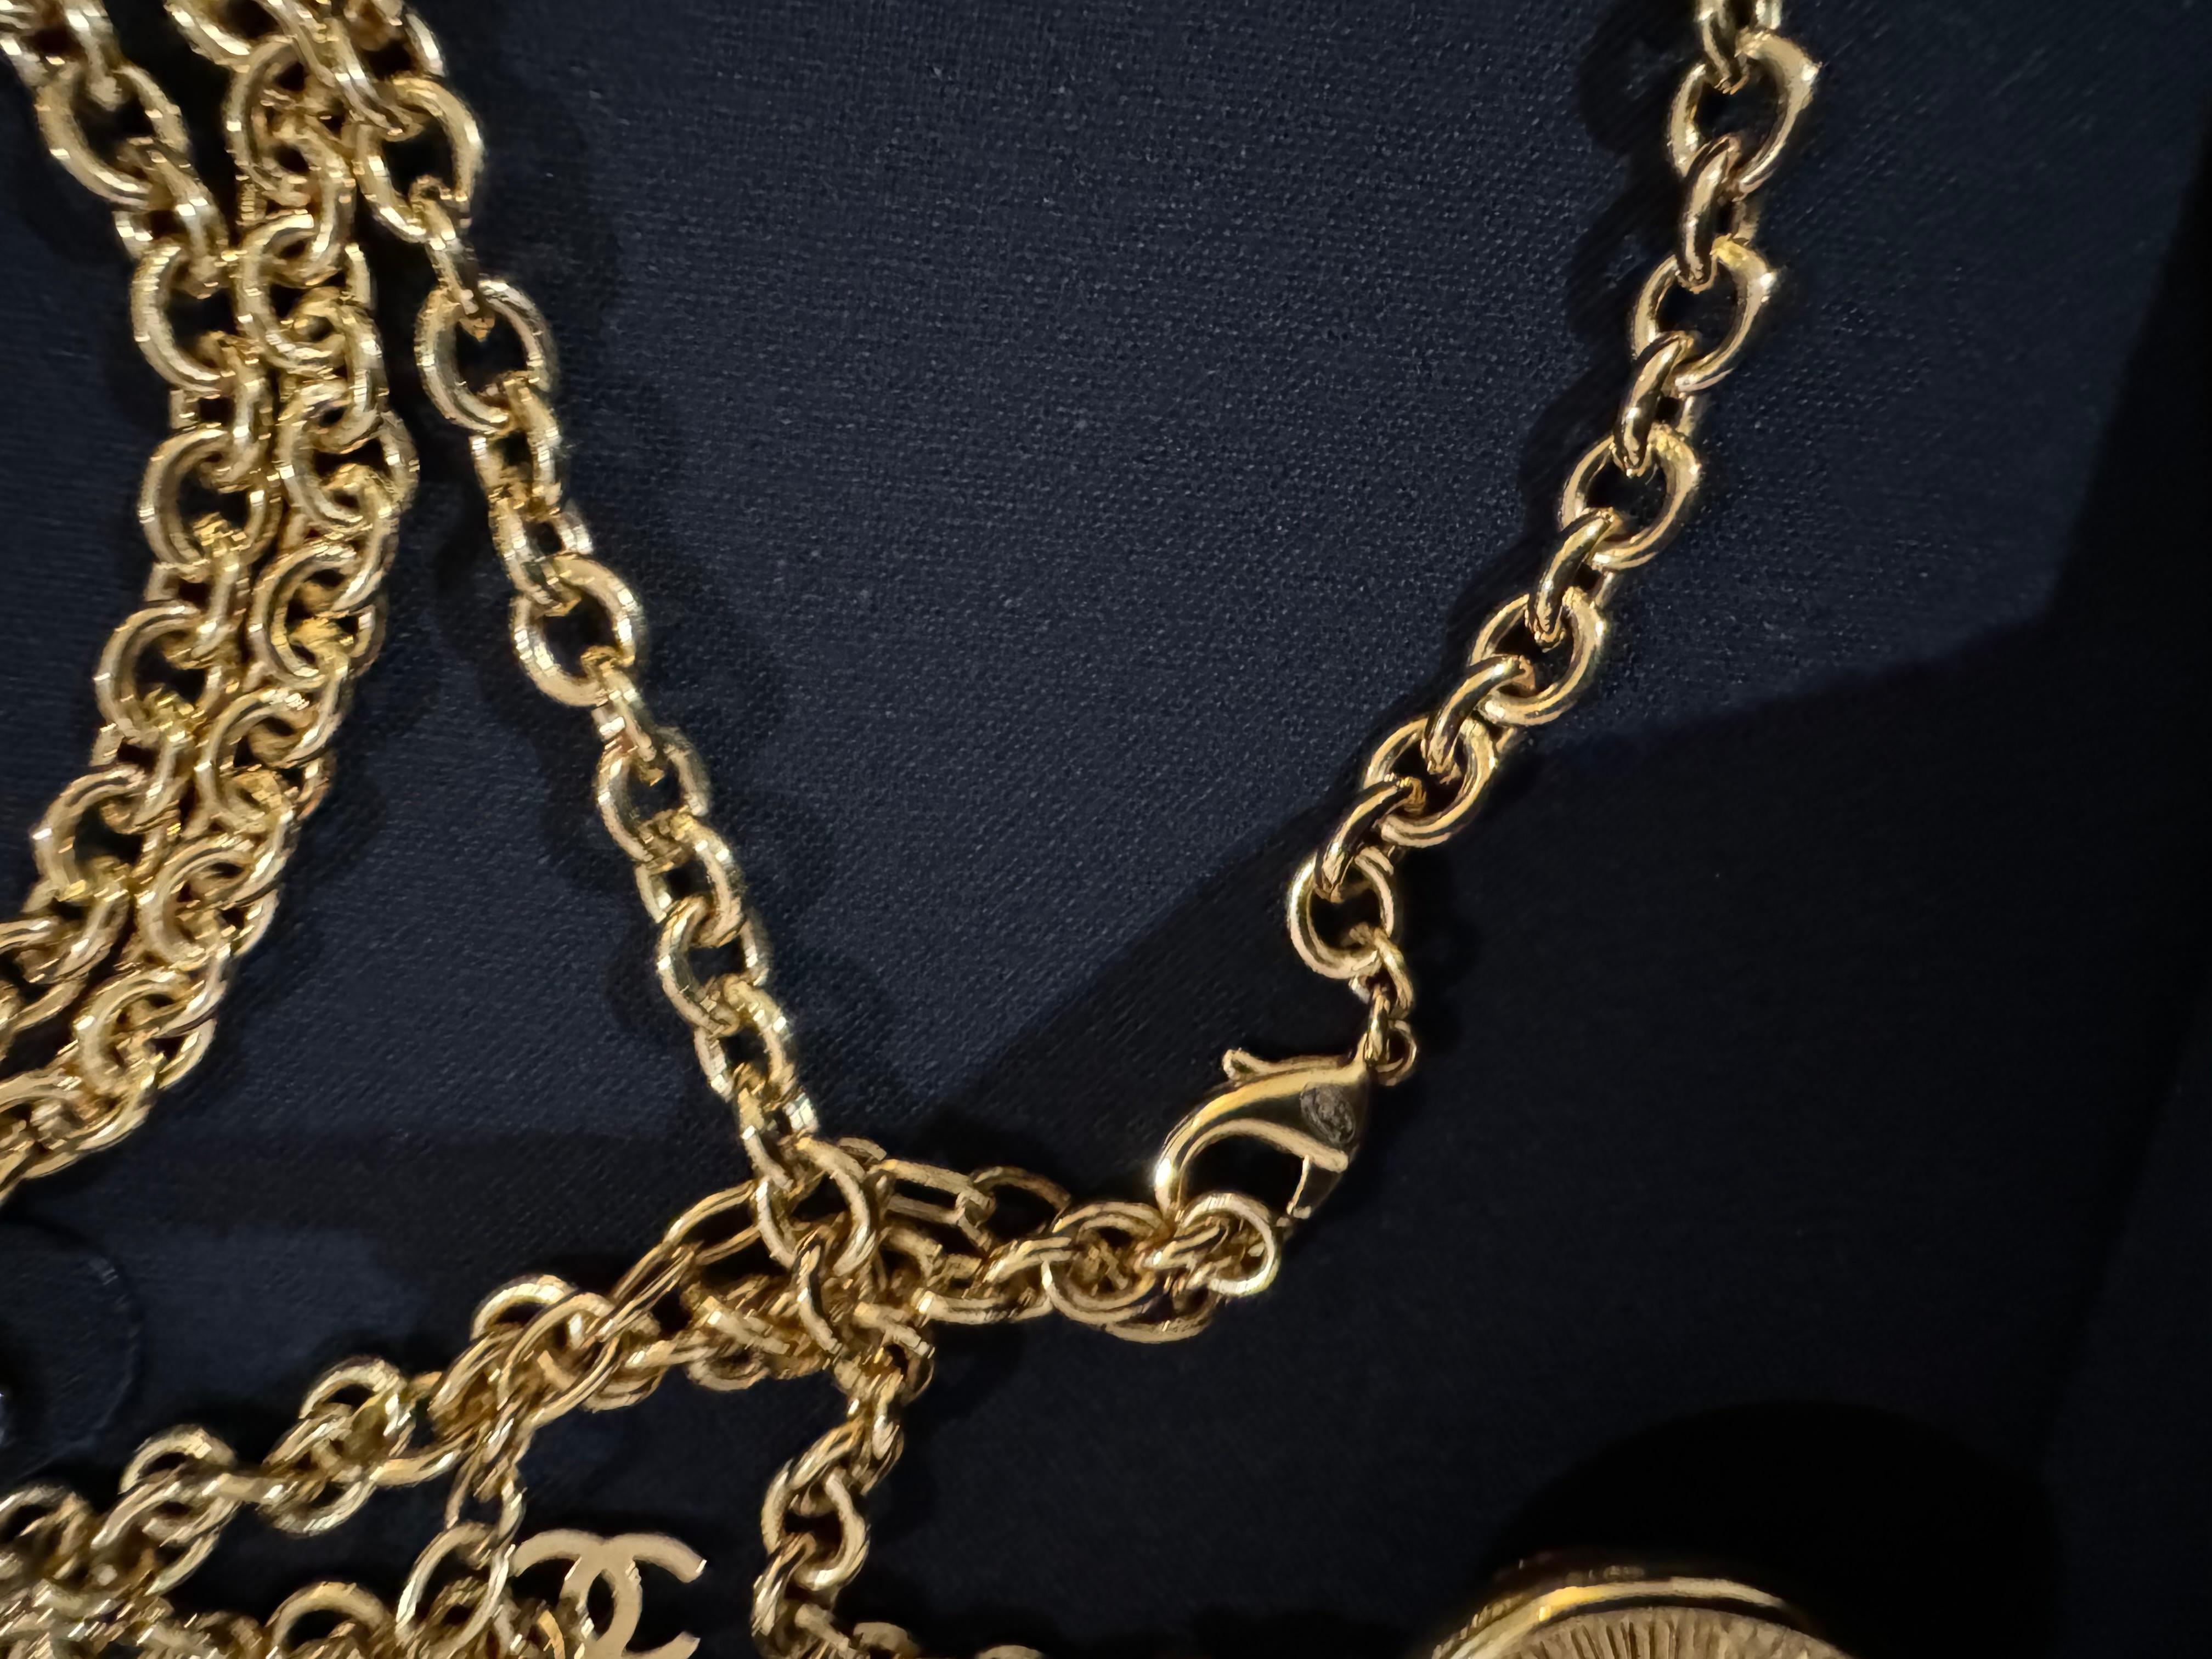 Chanel long medallion necklace gold with chanel cc logo In New Condition For Sale In London, England